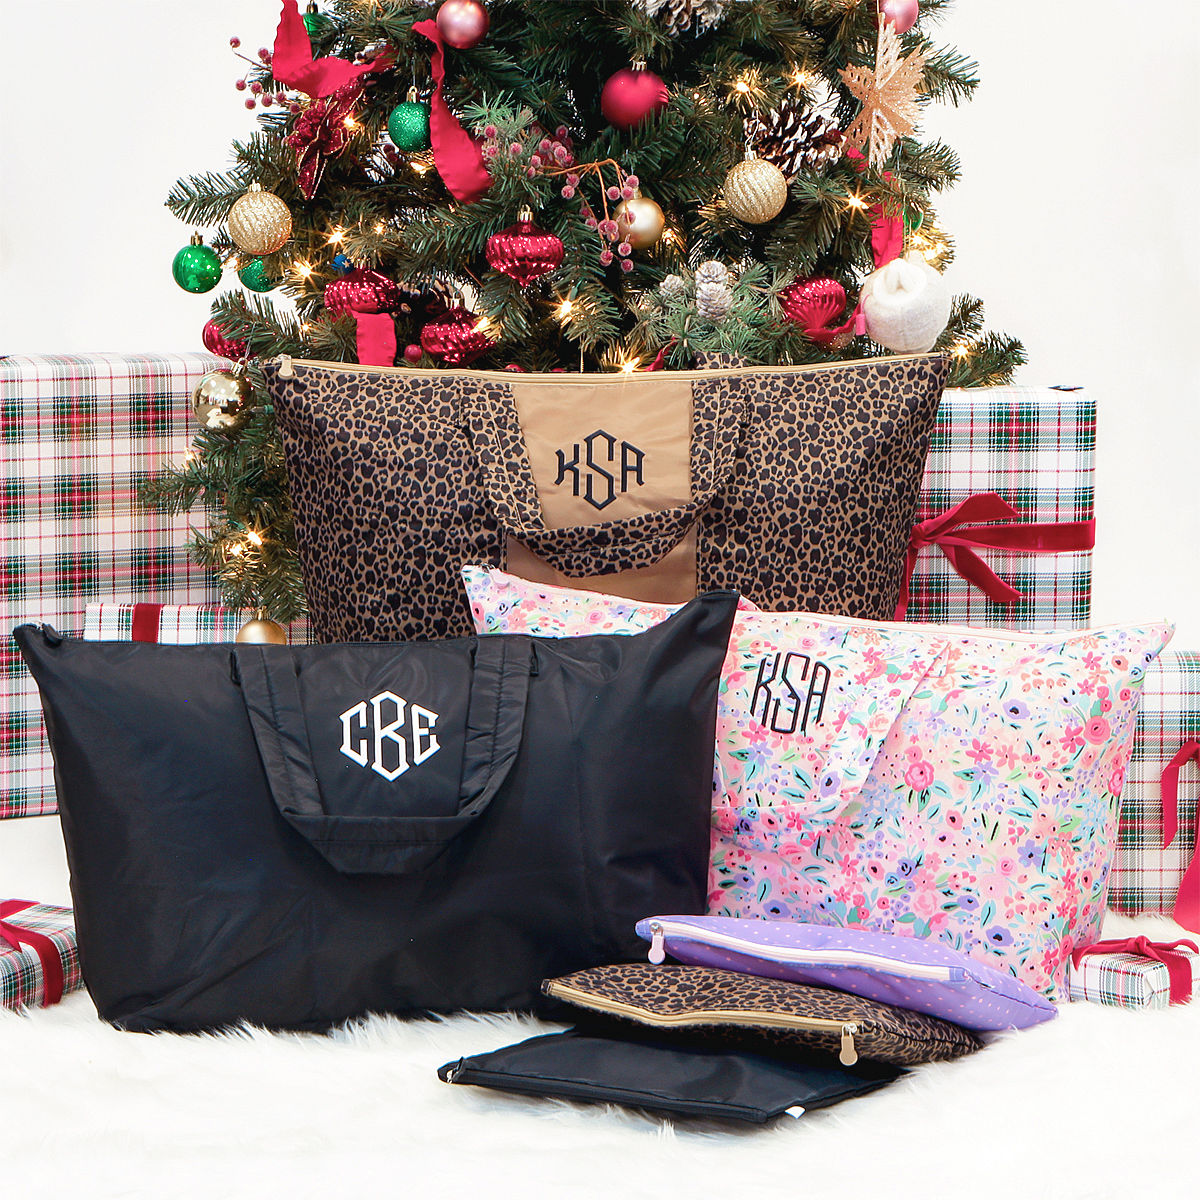 Marleylilly - Monogrammed Gifts - CONFETTI SALE ✨ Our Monogrammed